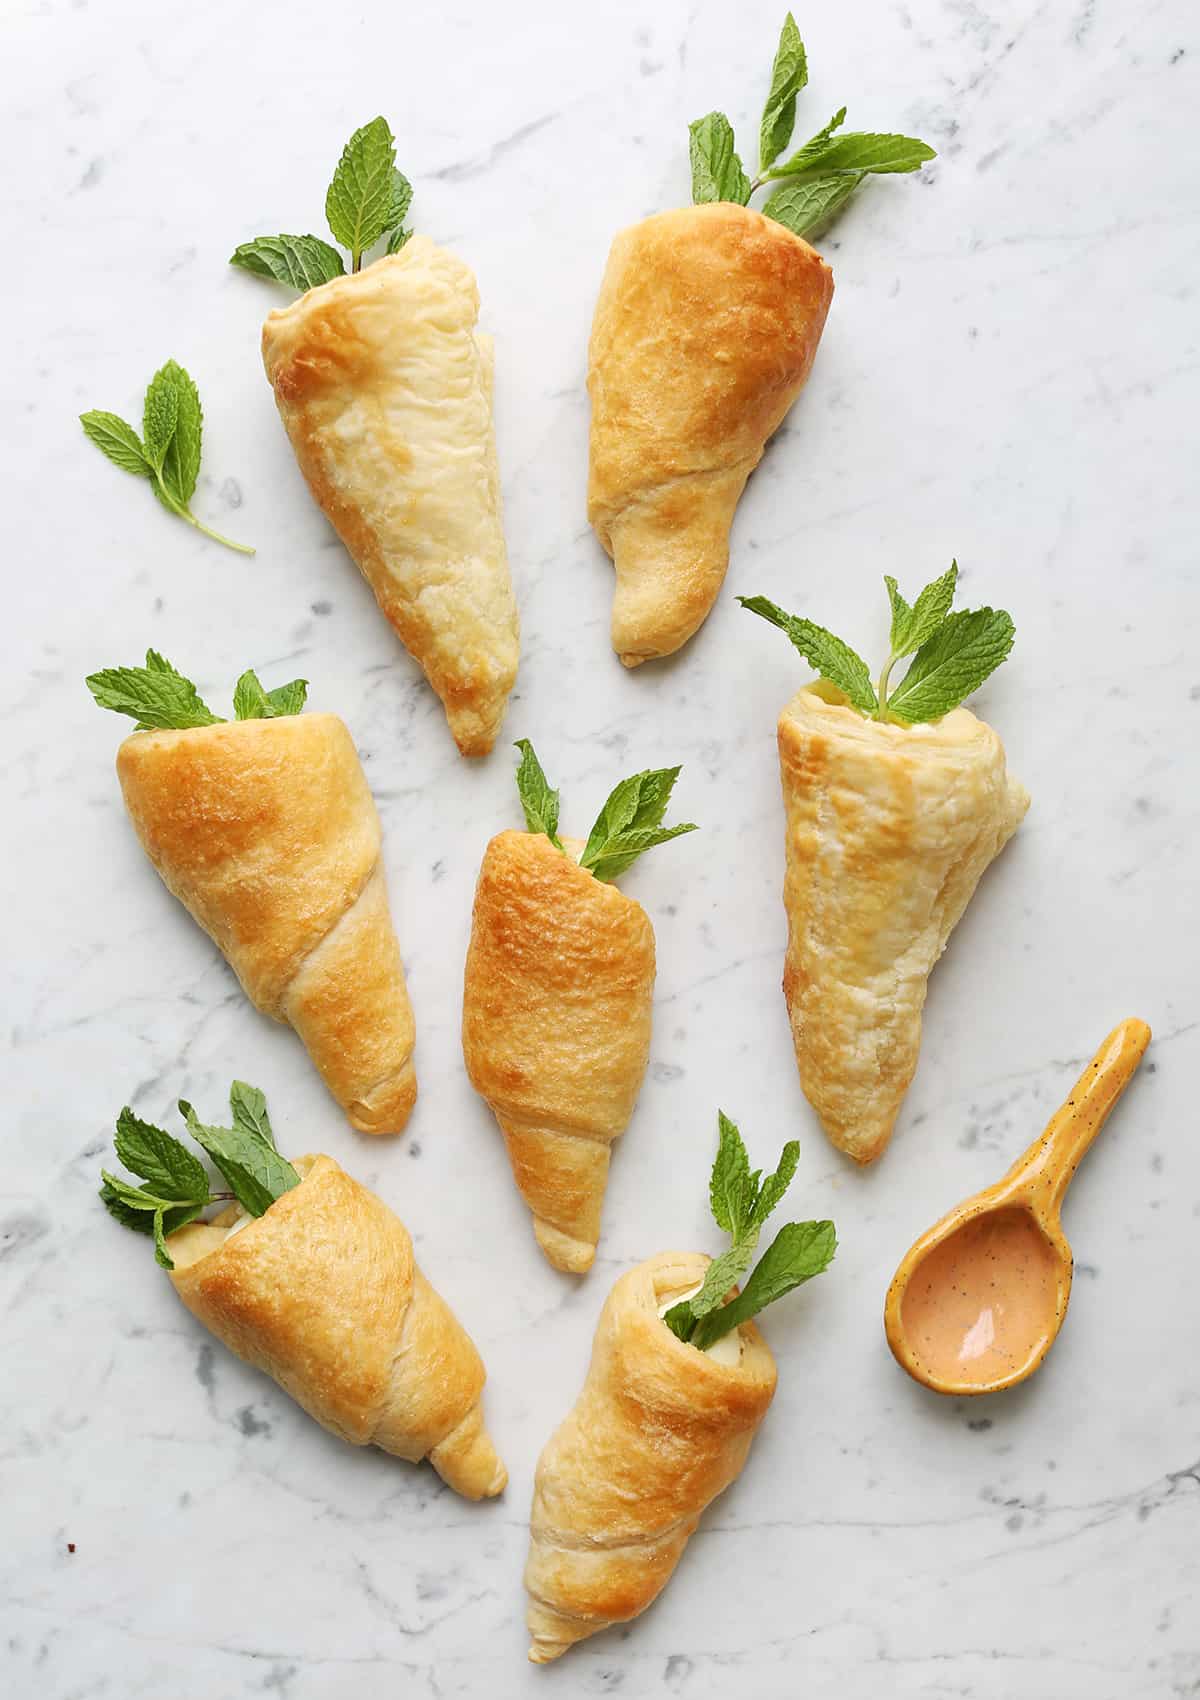 carrot-shaped pastries